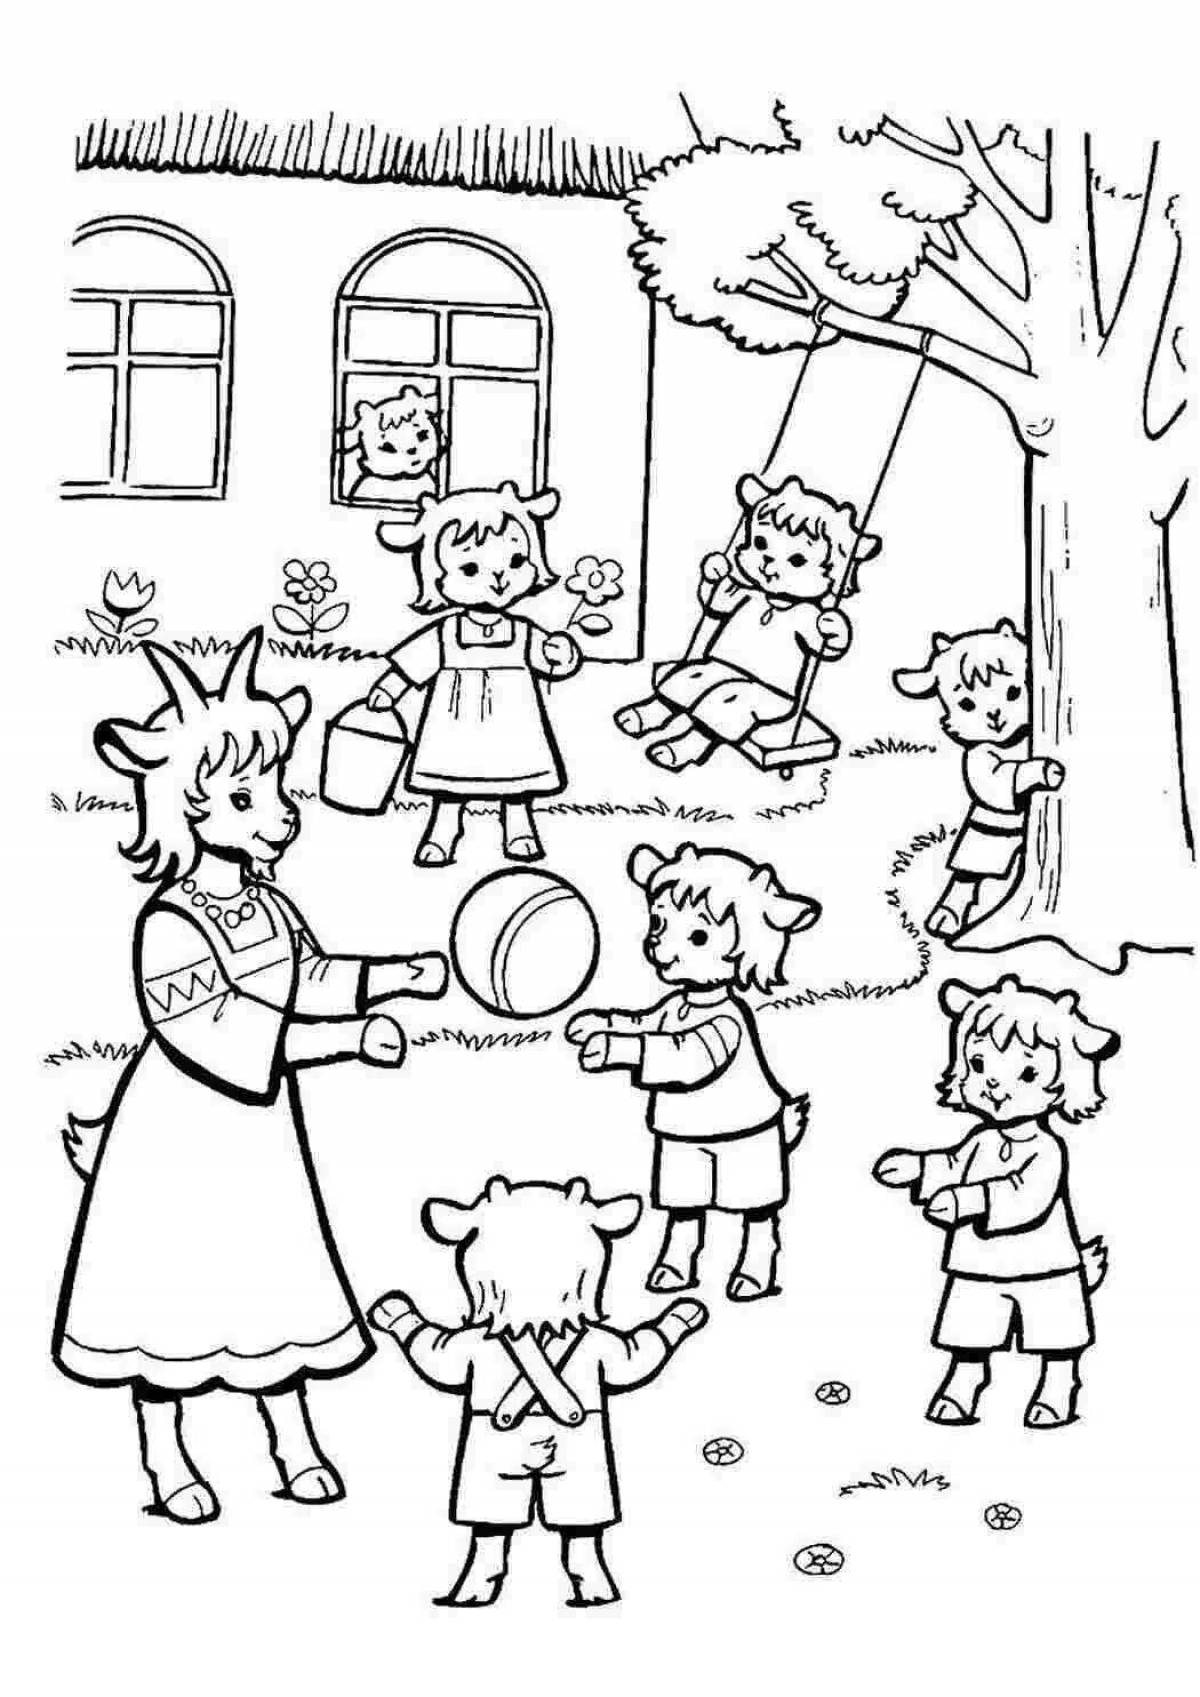 Coloring book shining goat and seven kids